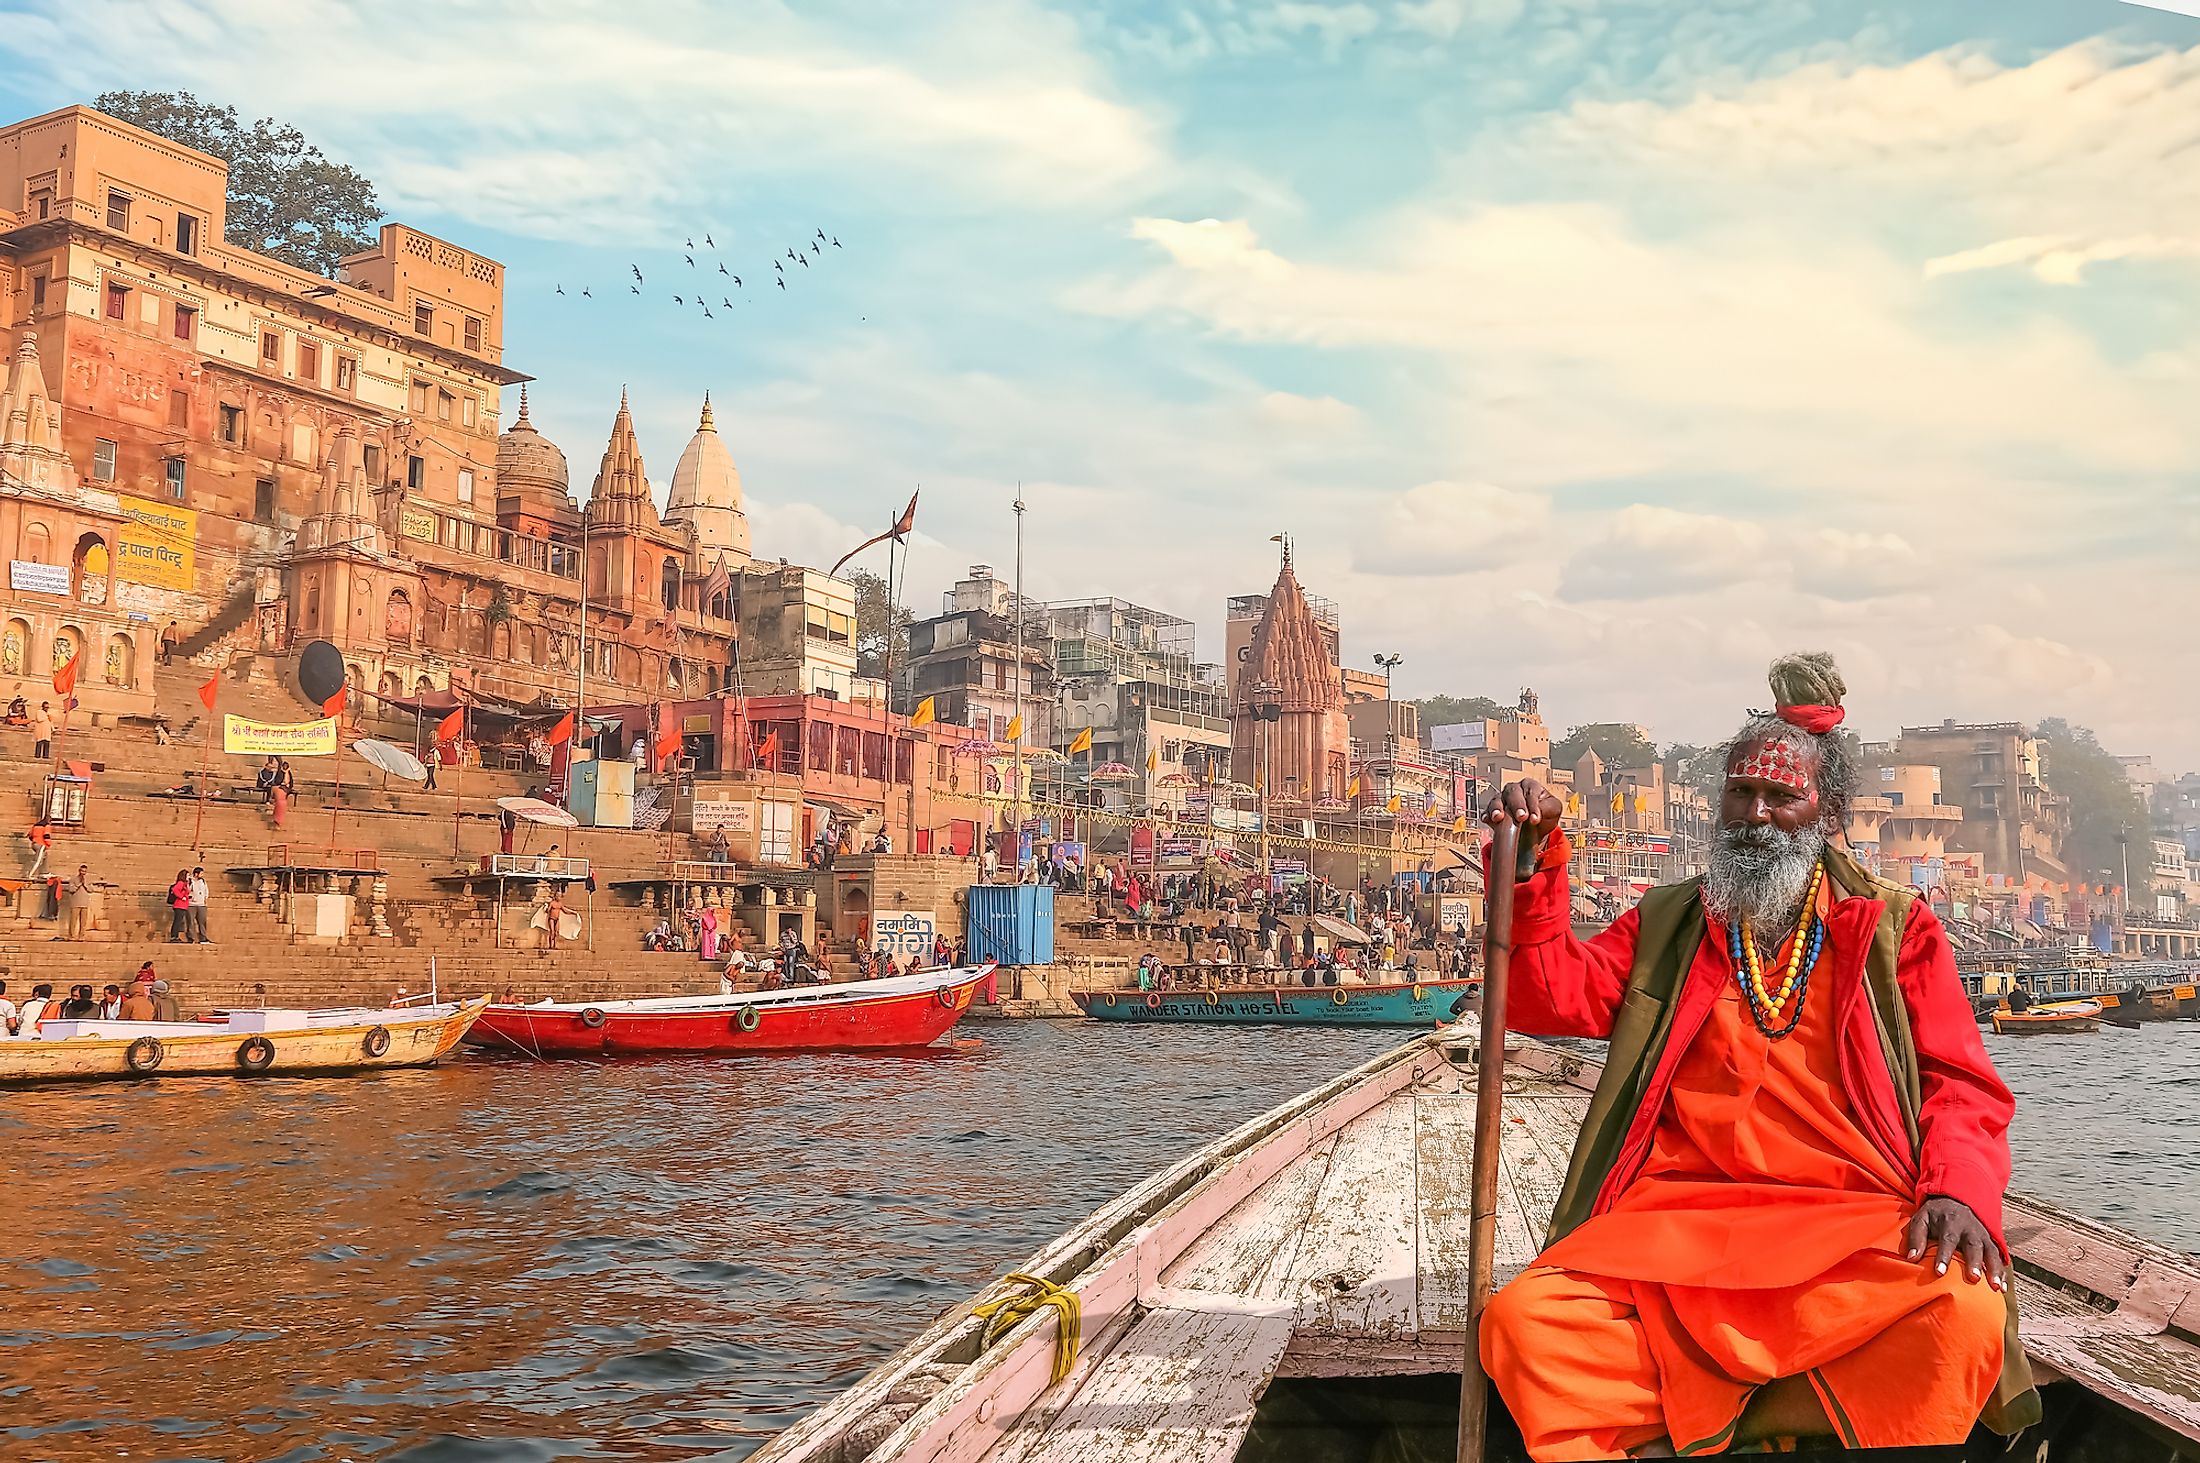 The Holy Ganges. Editorial credit: Roop_Dey / Shutterstock.com